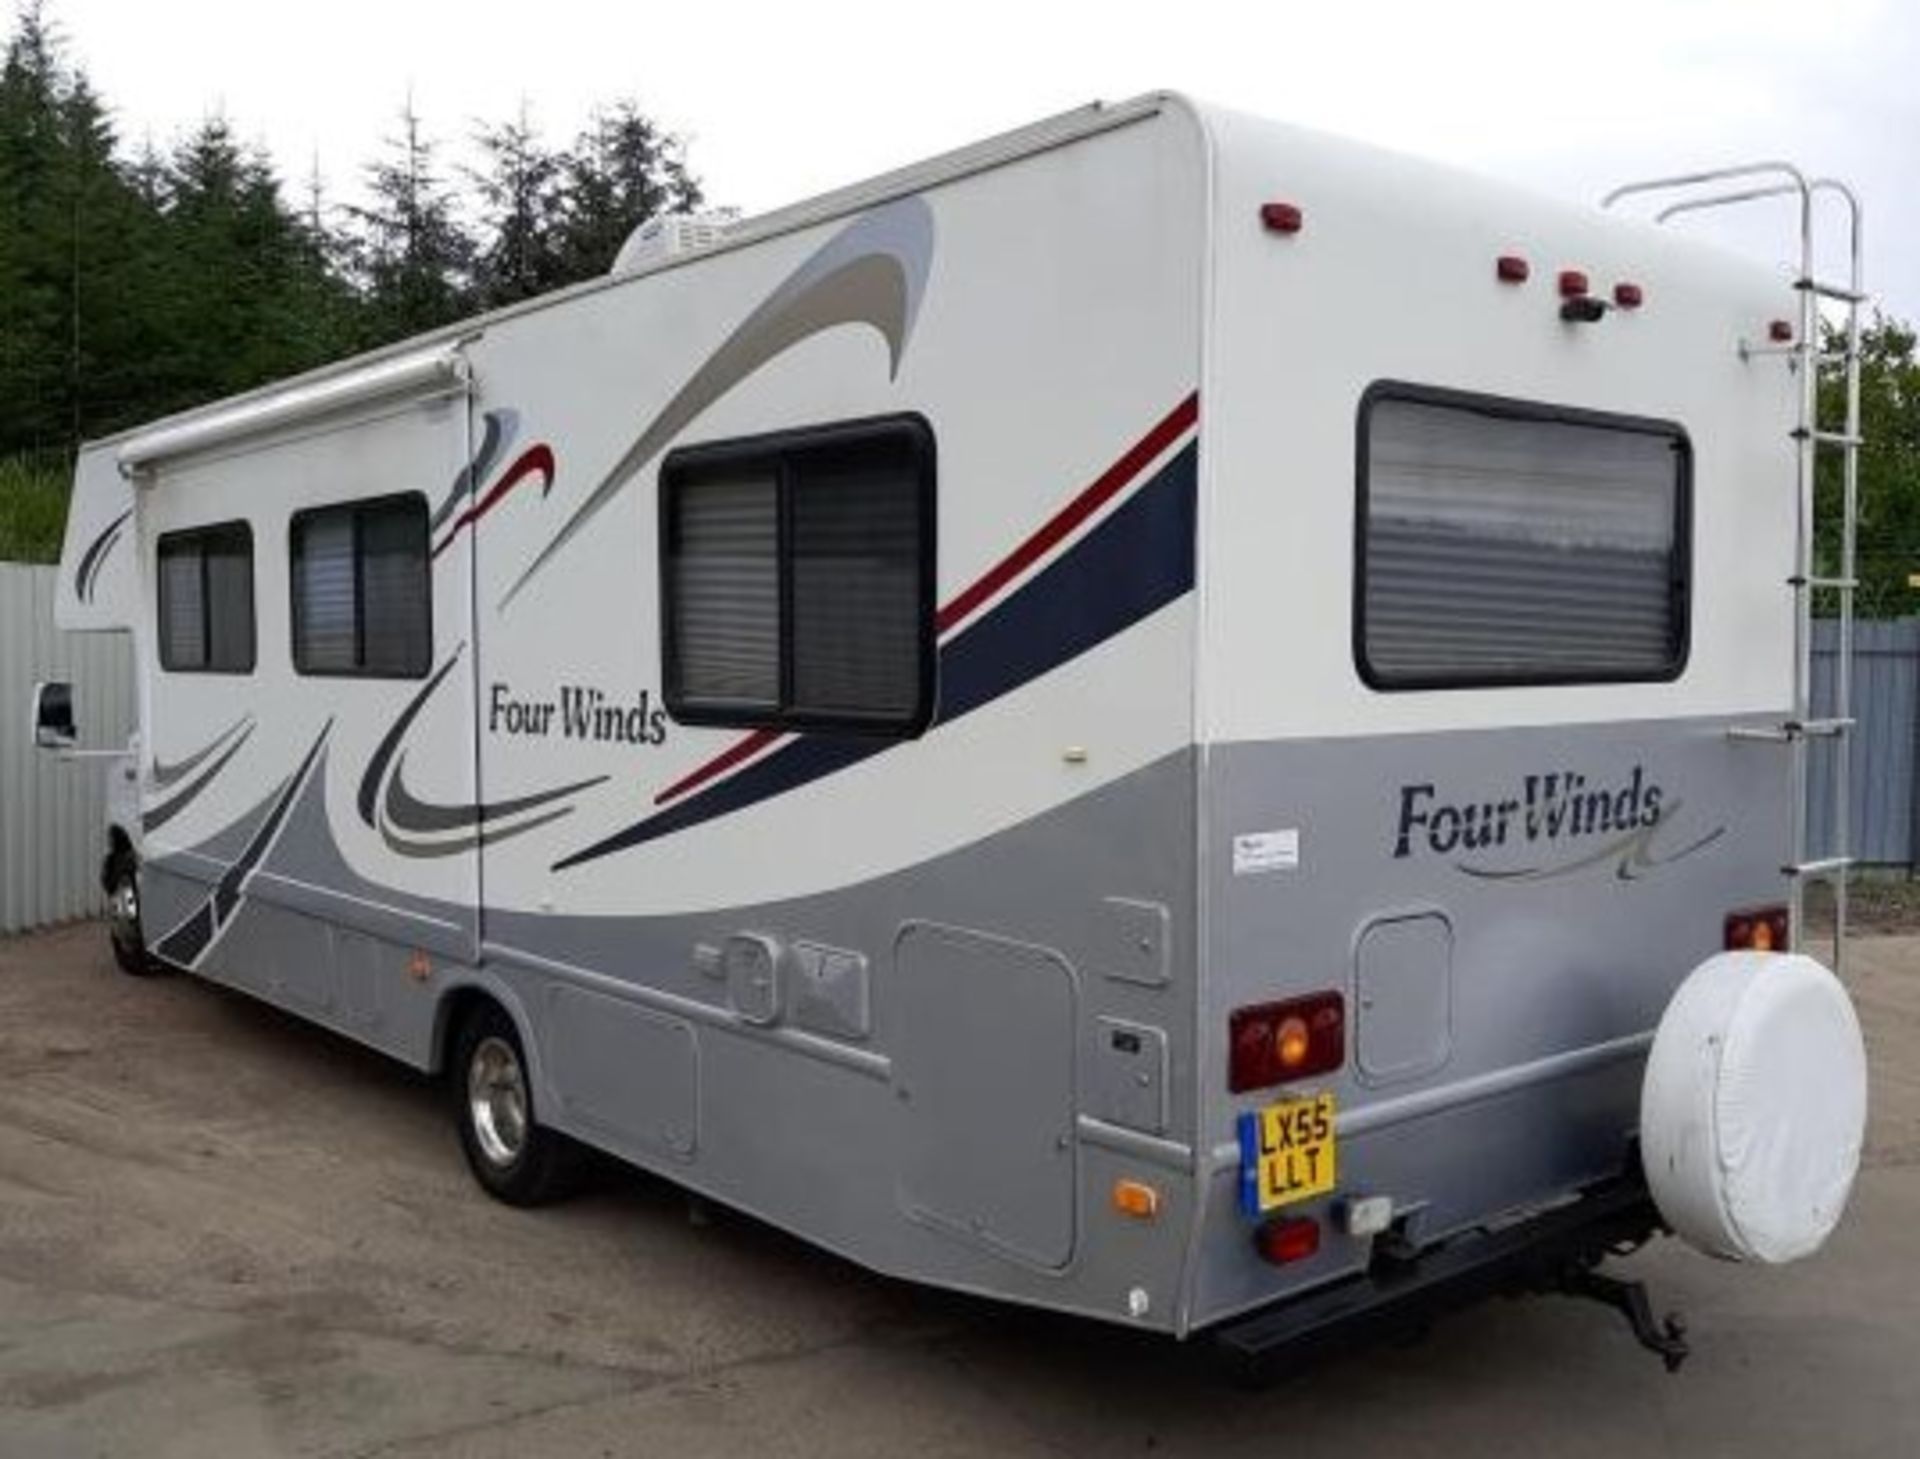 FORD E450 FOURWINDS RV 7 BERTH LHD MOTORHOME, VERY LOW MILEAGE 34,453 MILES *NO VAT* - Image 3 of 13